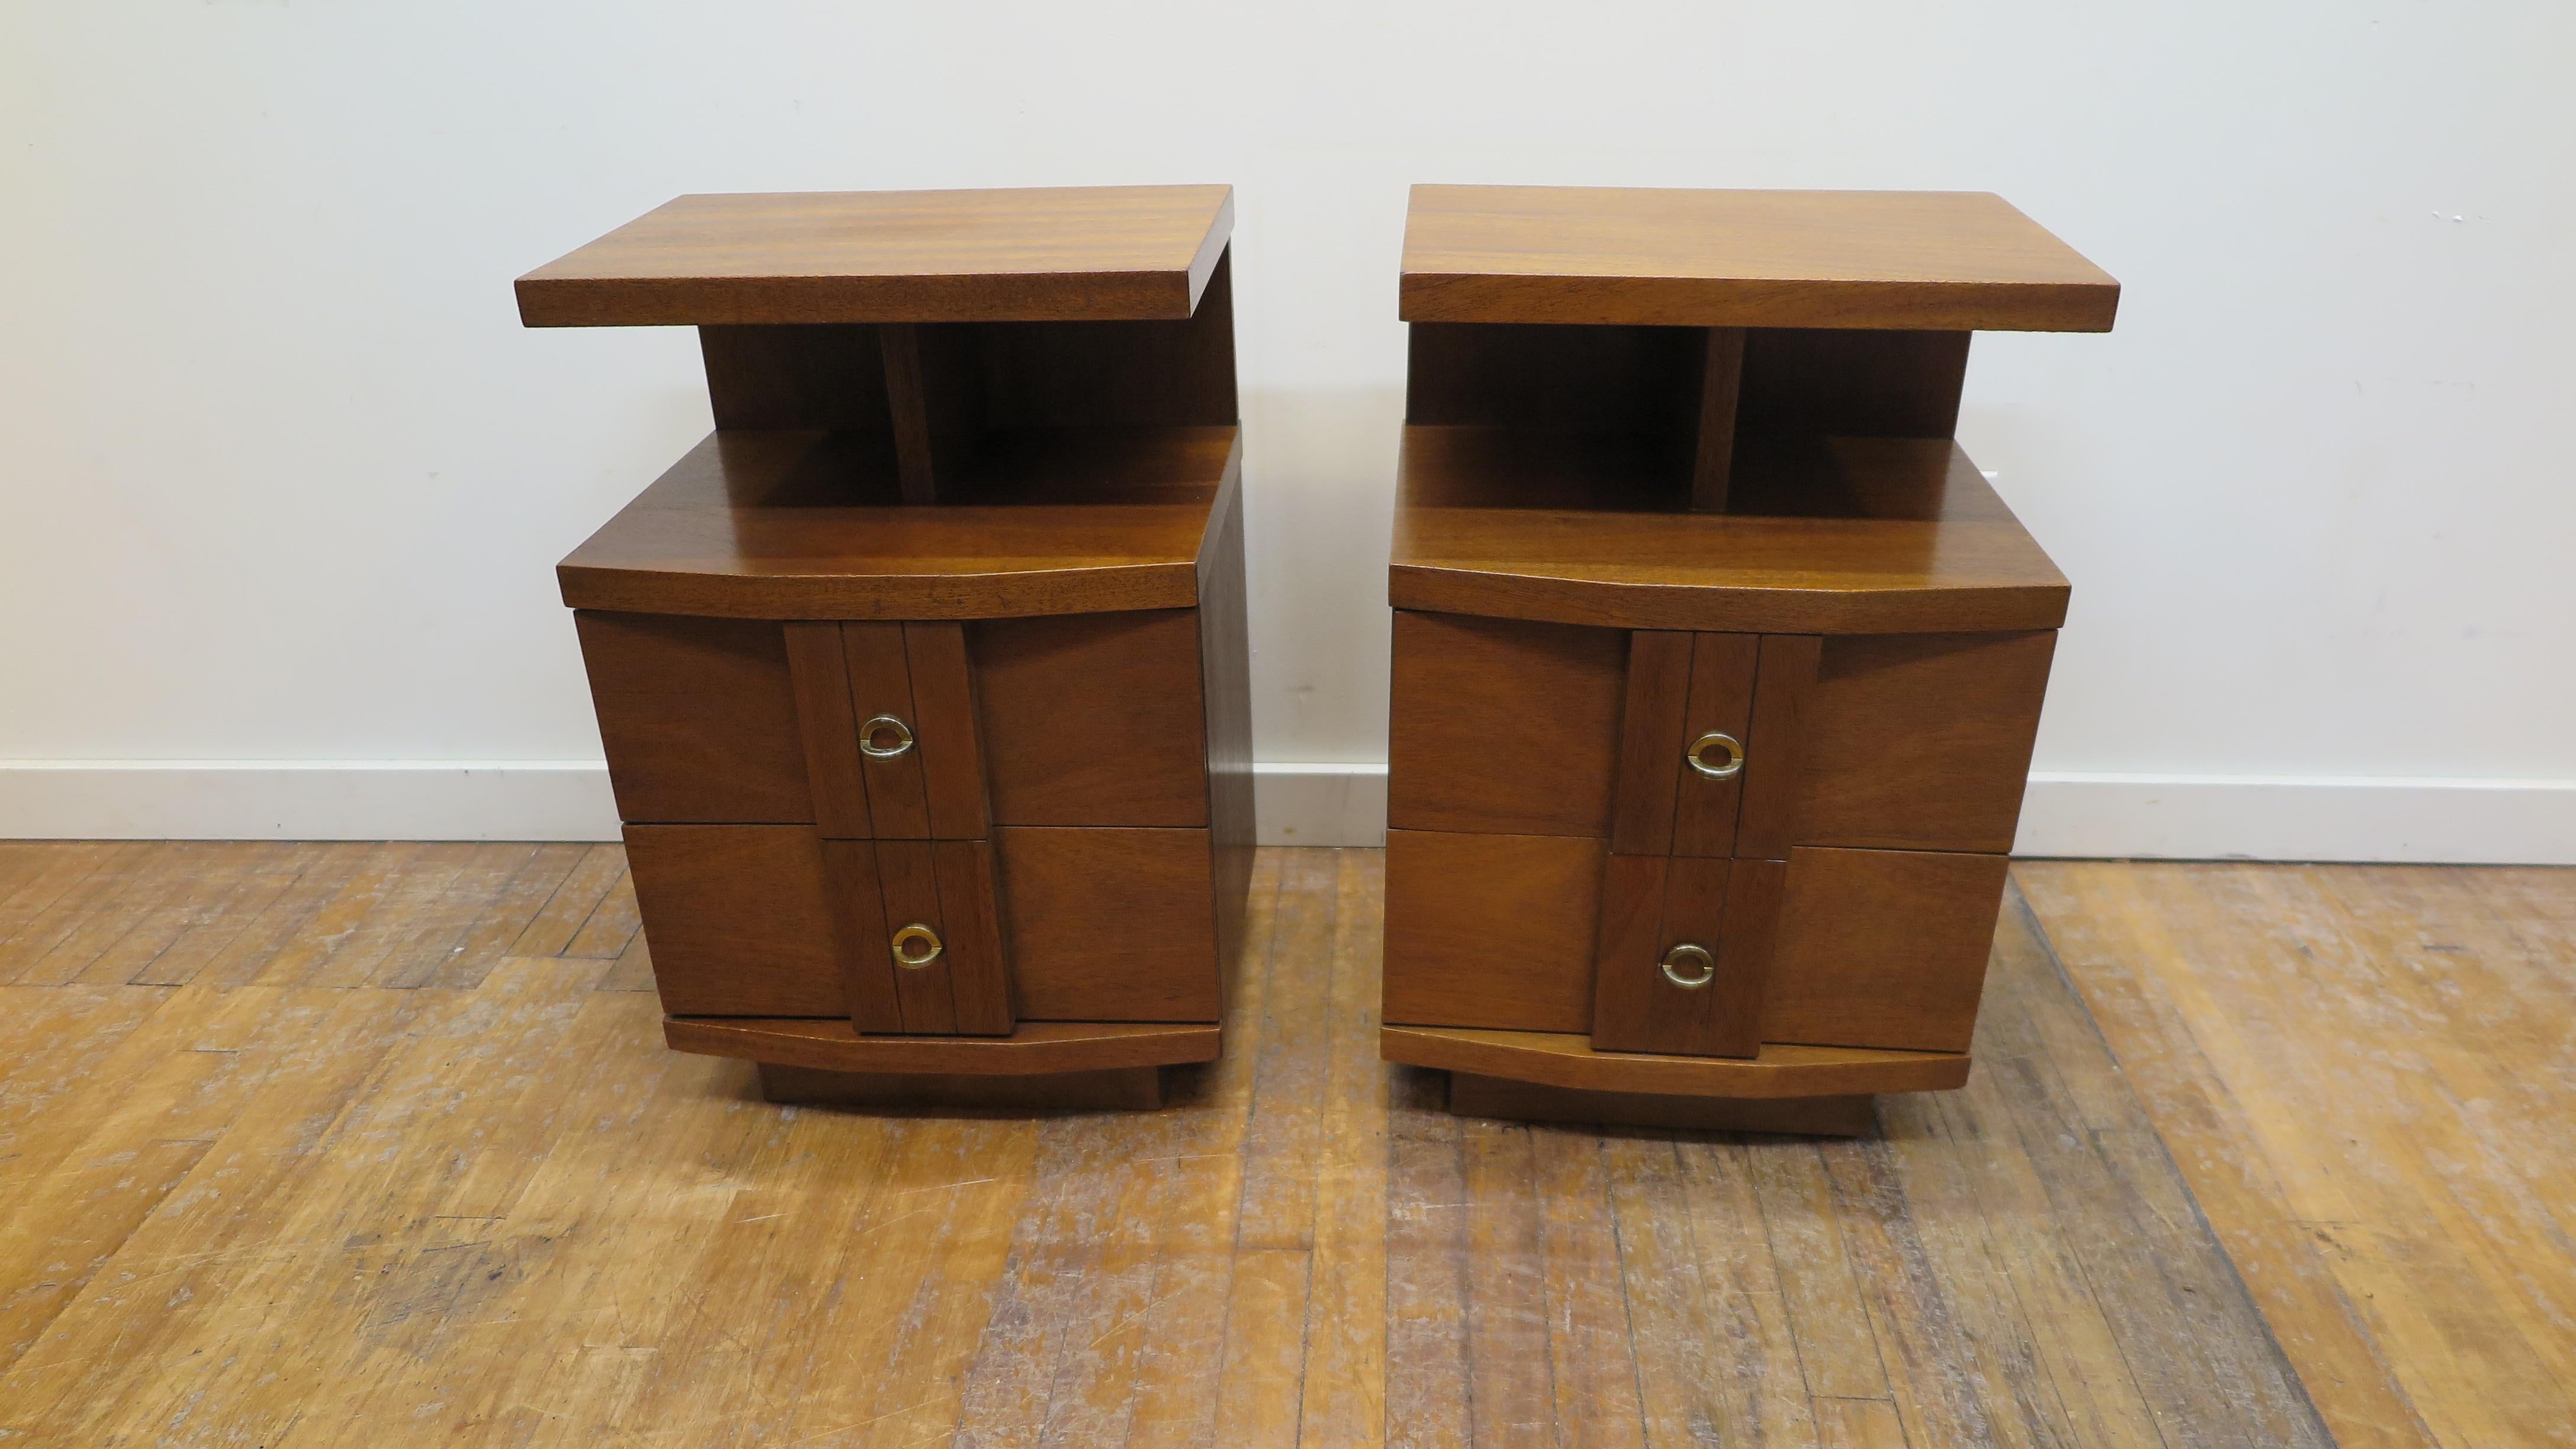 Pair of Kent Coffey Mid-Century Modern night stand side table. Titan line by Kent Coffey mid century modern side tables. Each having shelf platform with two drawers. In good original condition. Light wear in good condition.